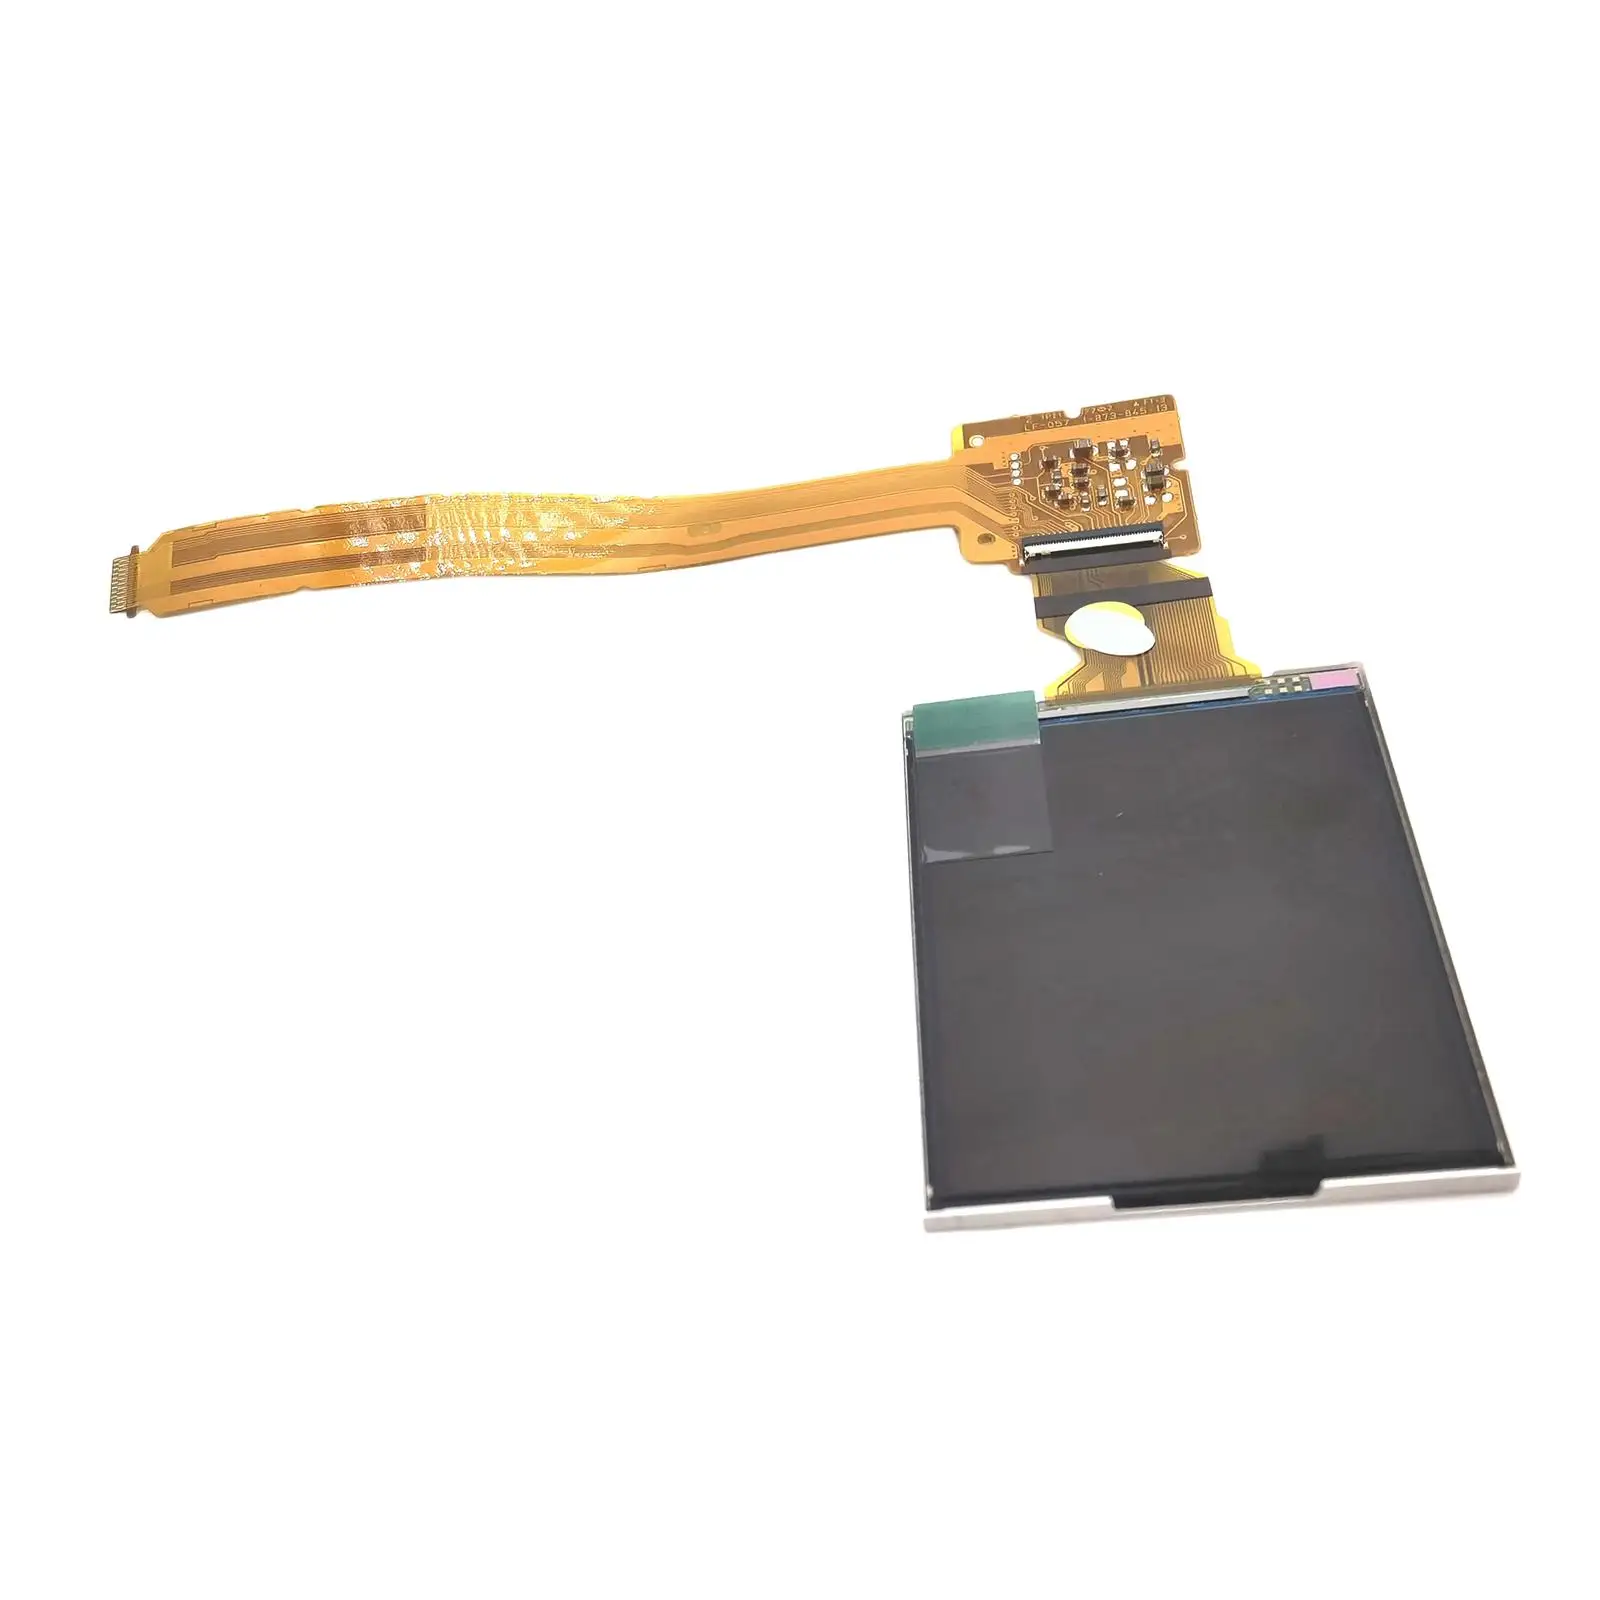 Replacements LCD Display Screen Spare Parts with Cable for DSLR A200 A300 A350 Camera Repair Parts